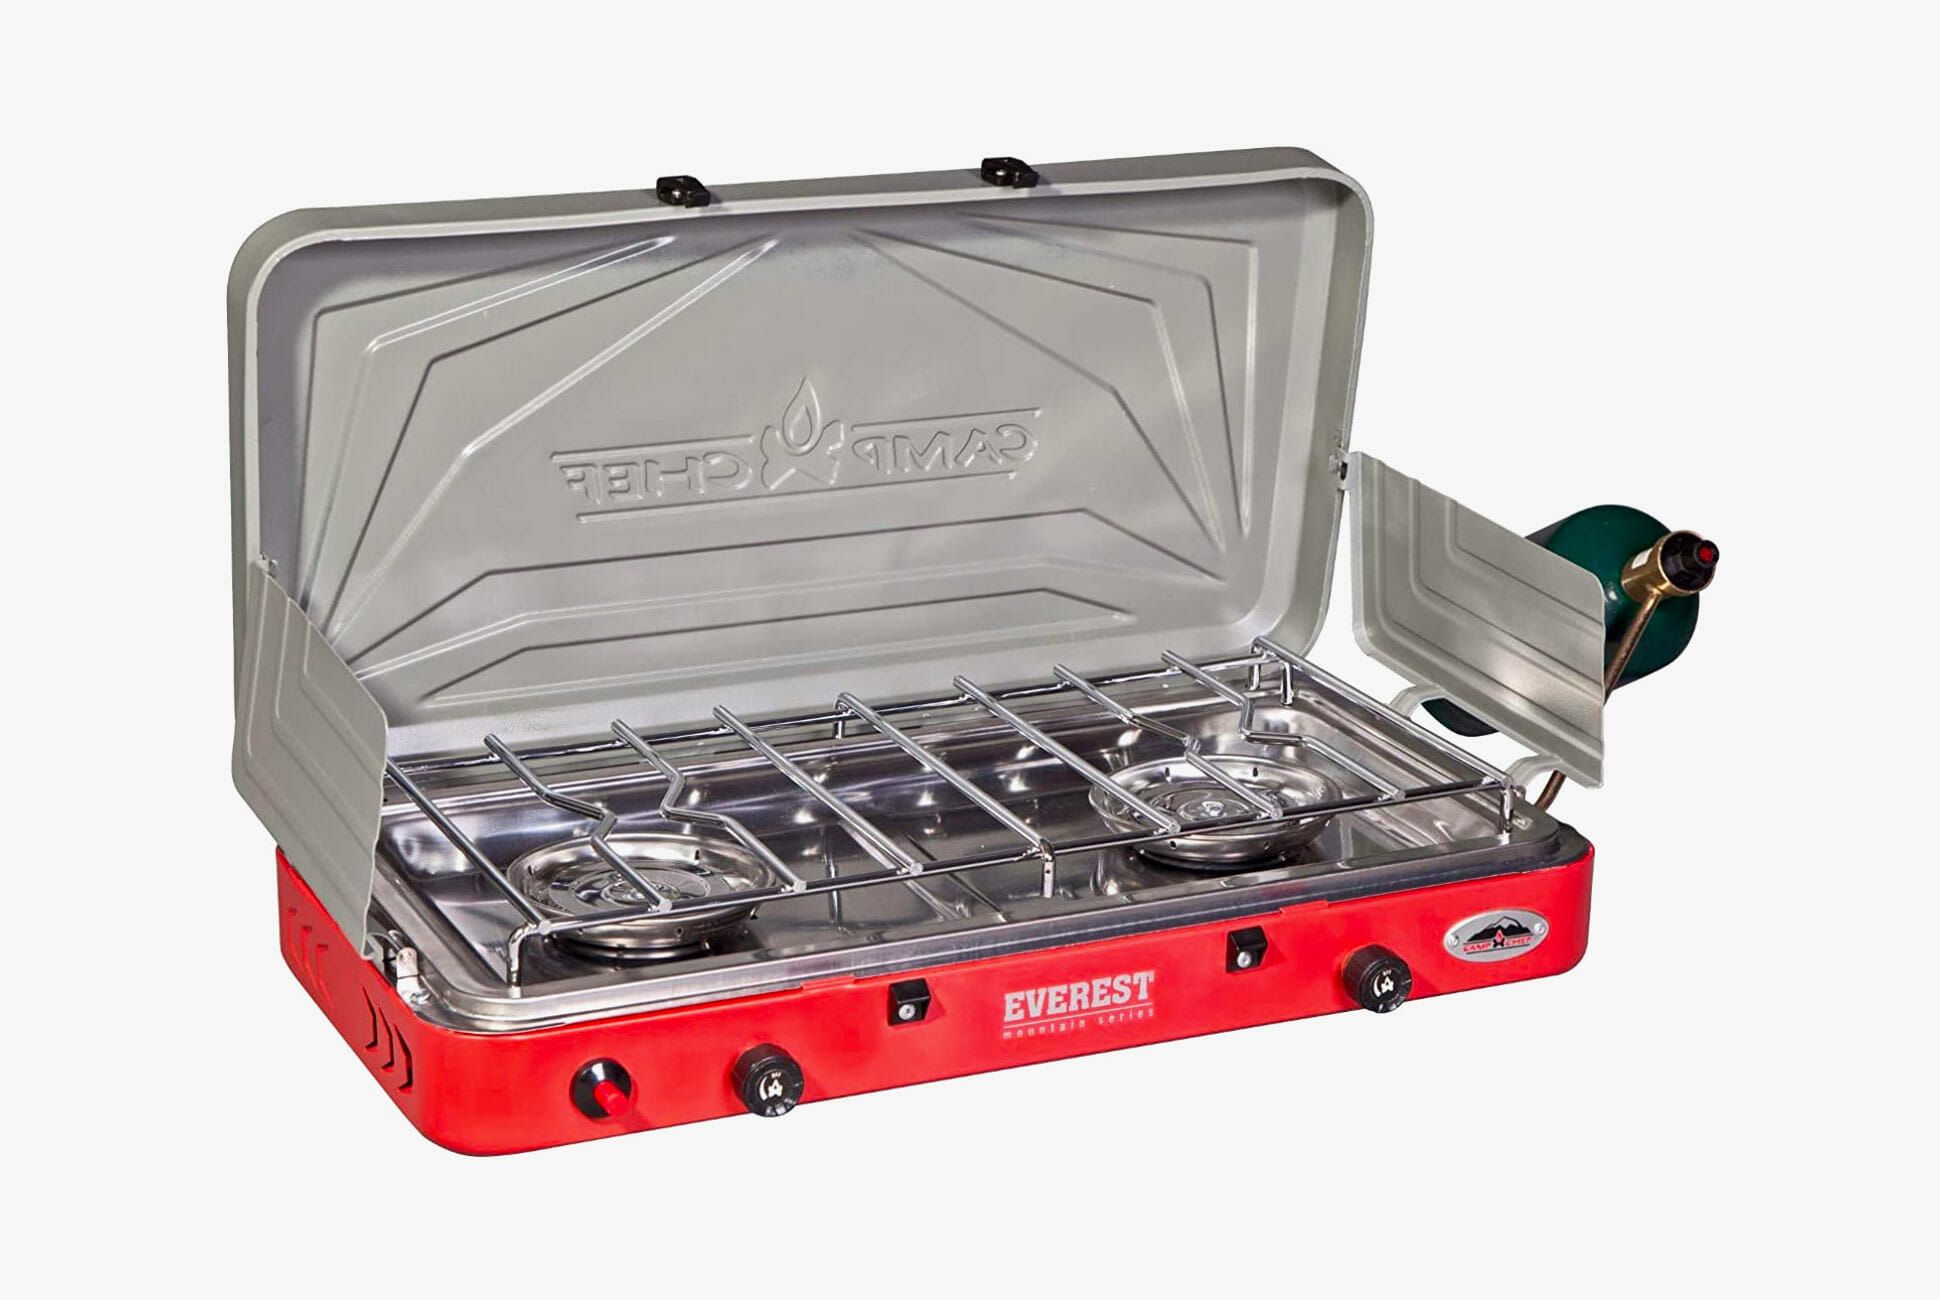 The Perfect Car Camping Stove Is 38% Off Right Now • Gear Patrol